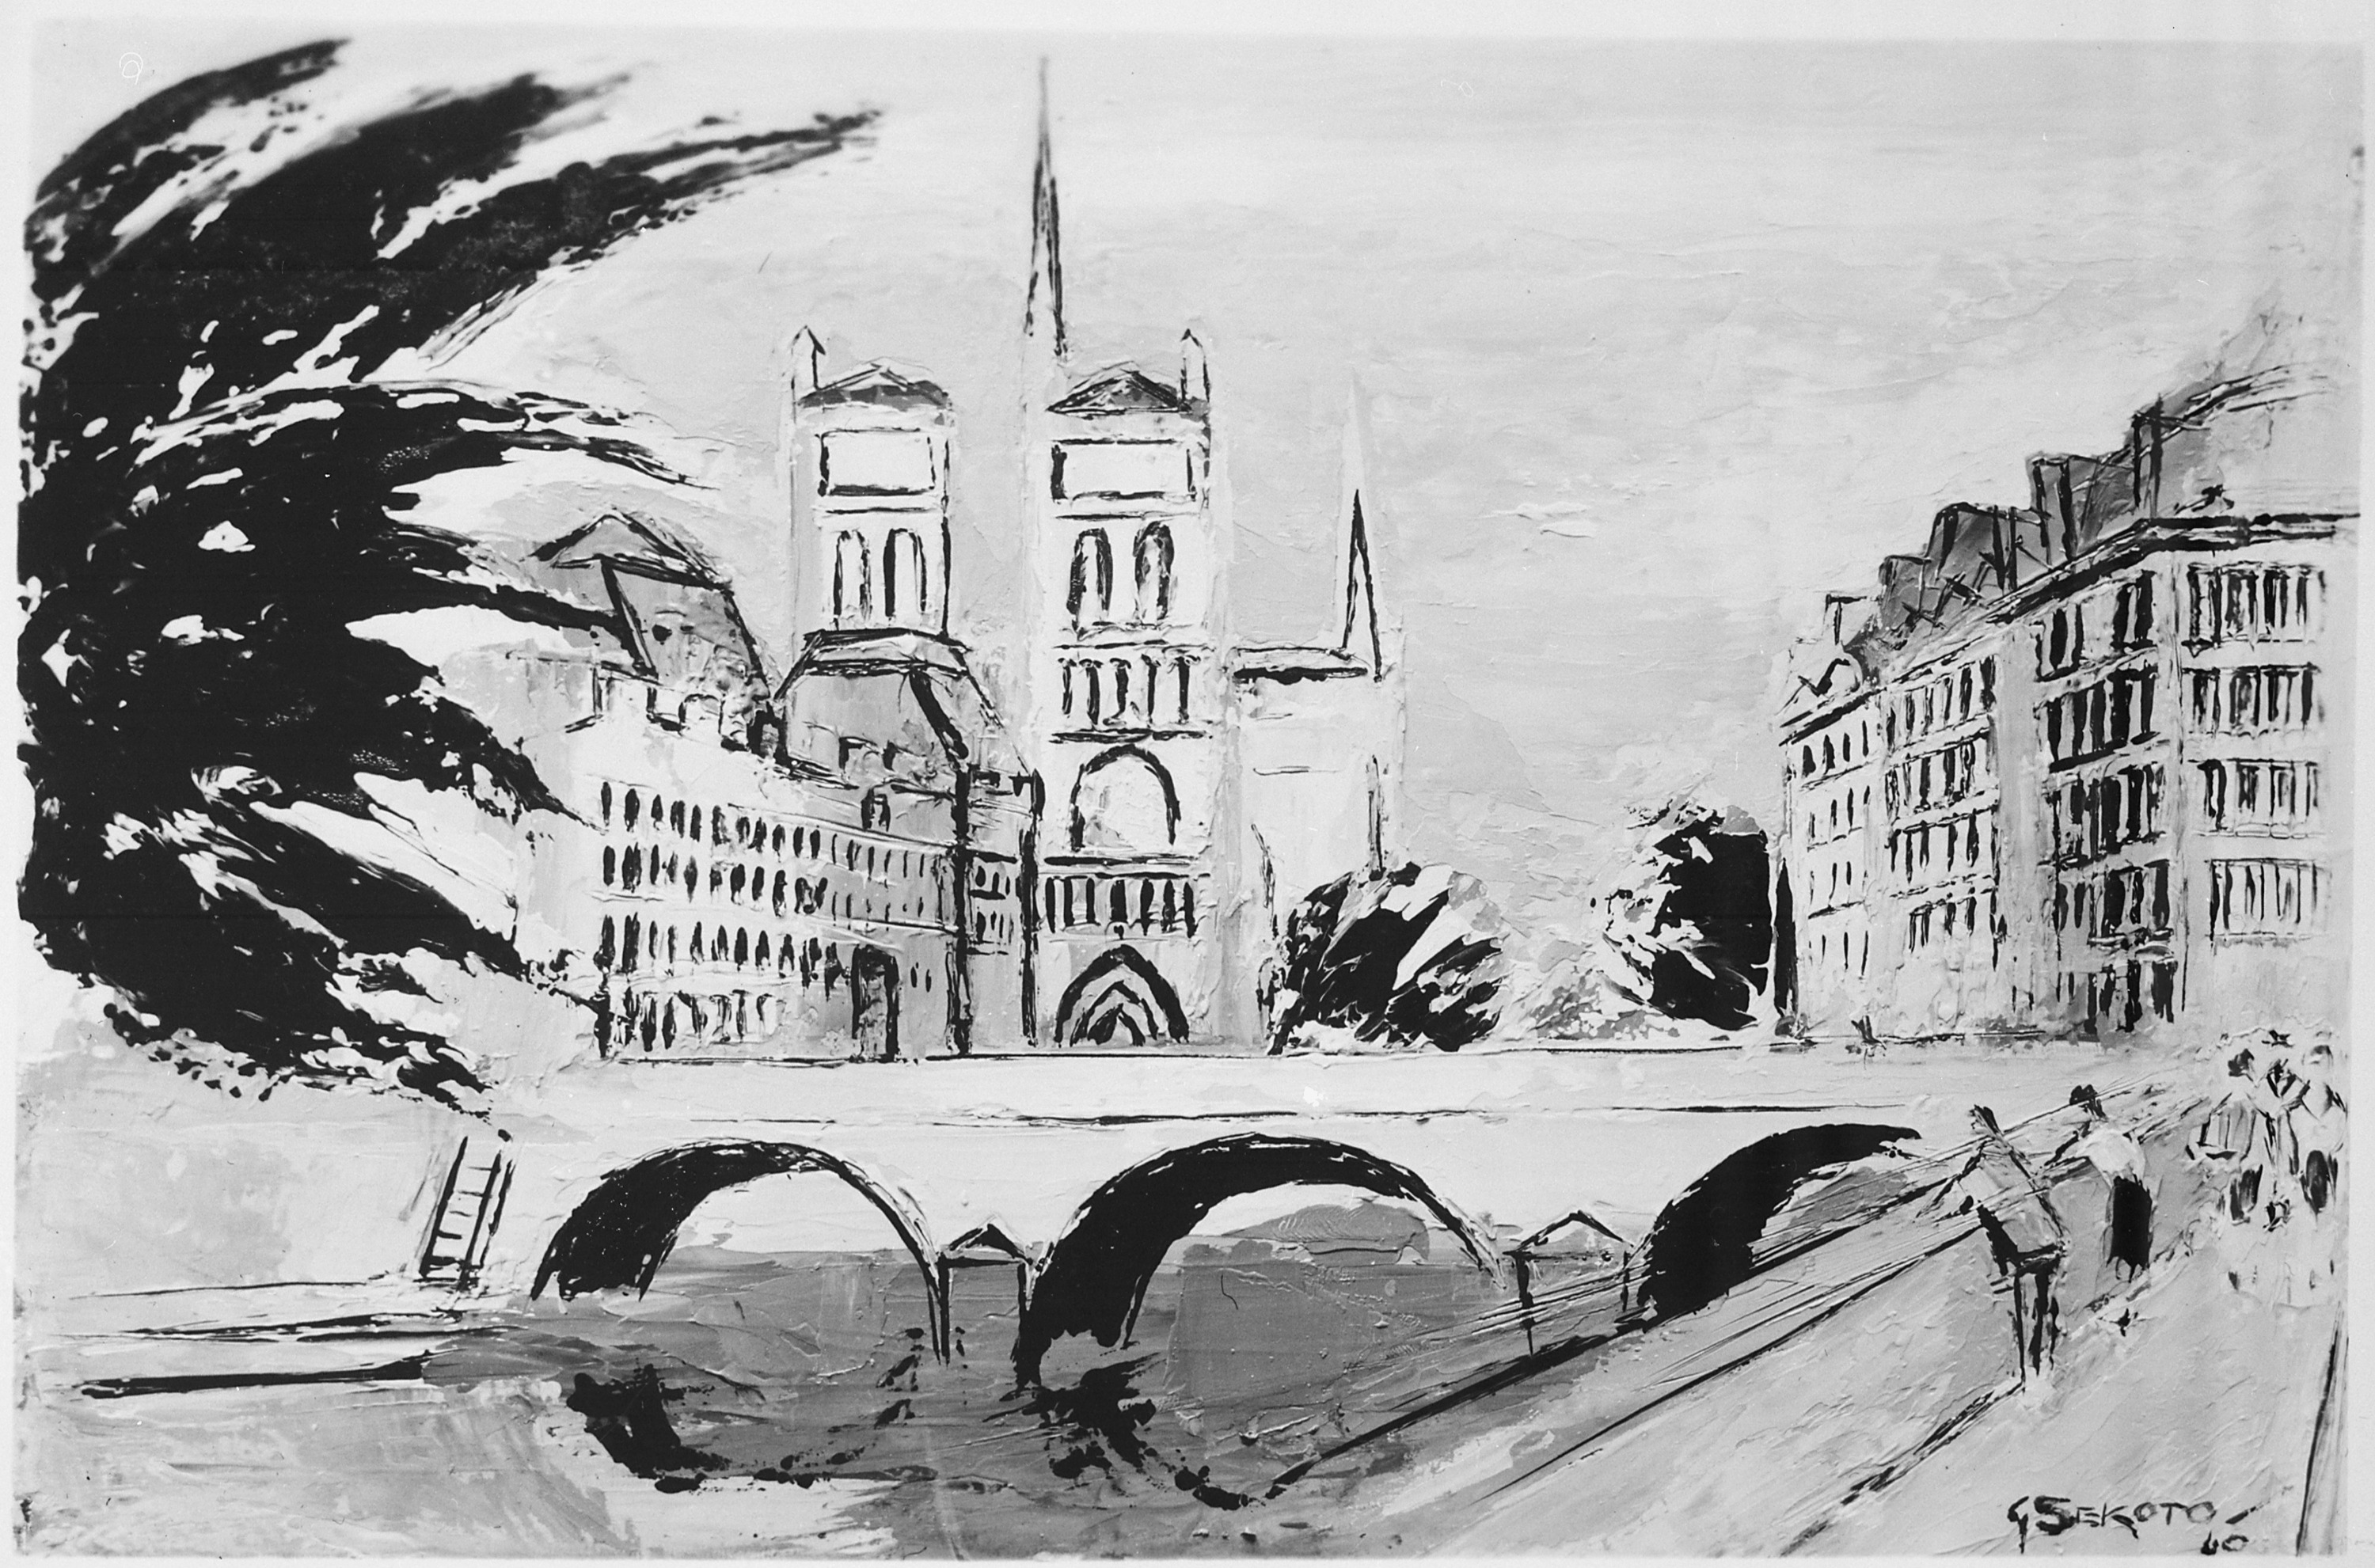 The Notre Dame Church by Sekoto. 